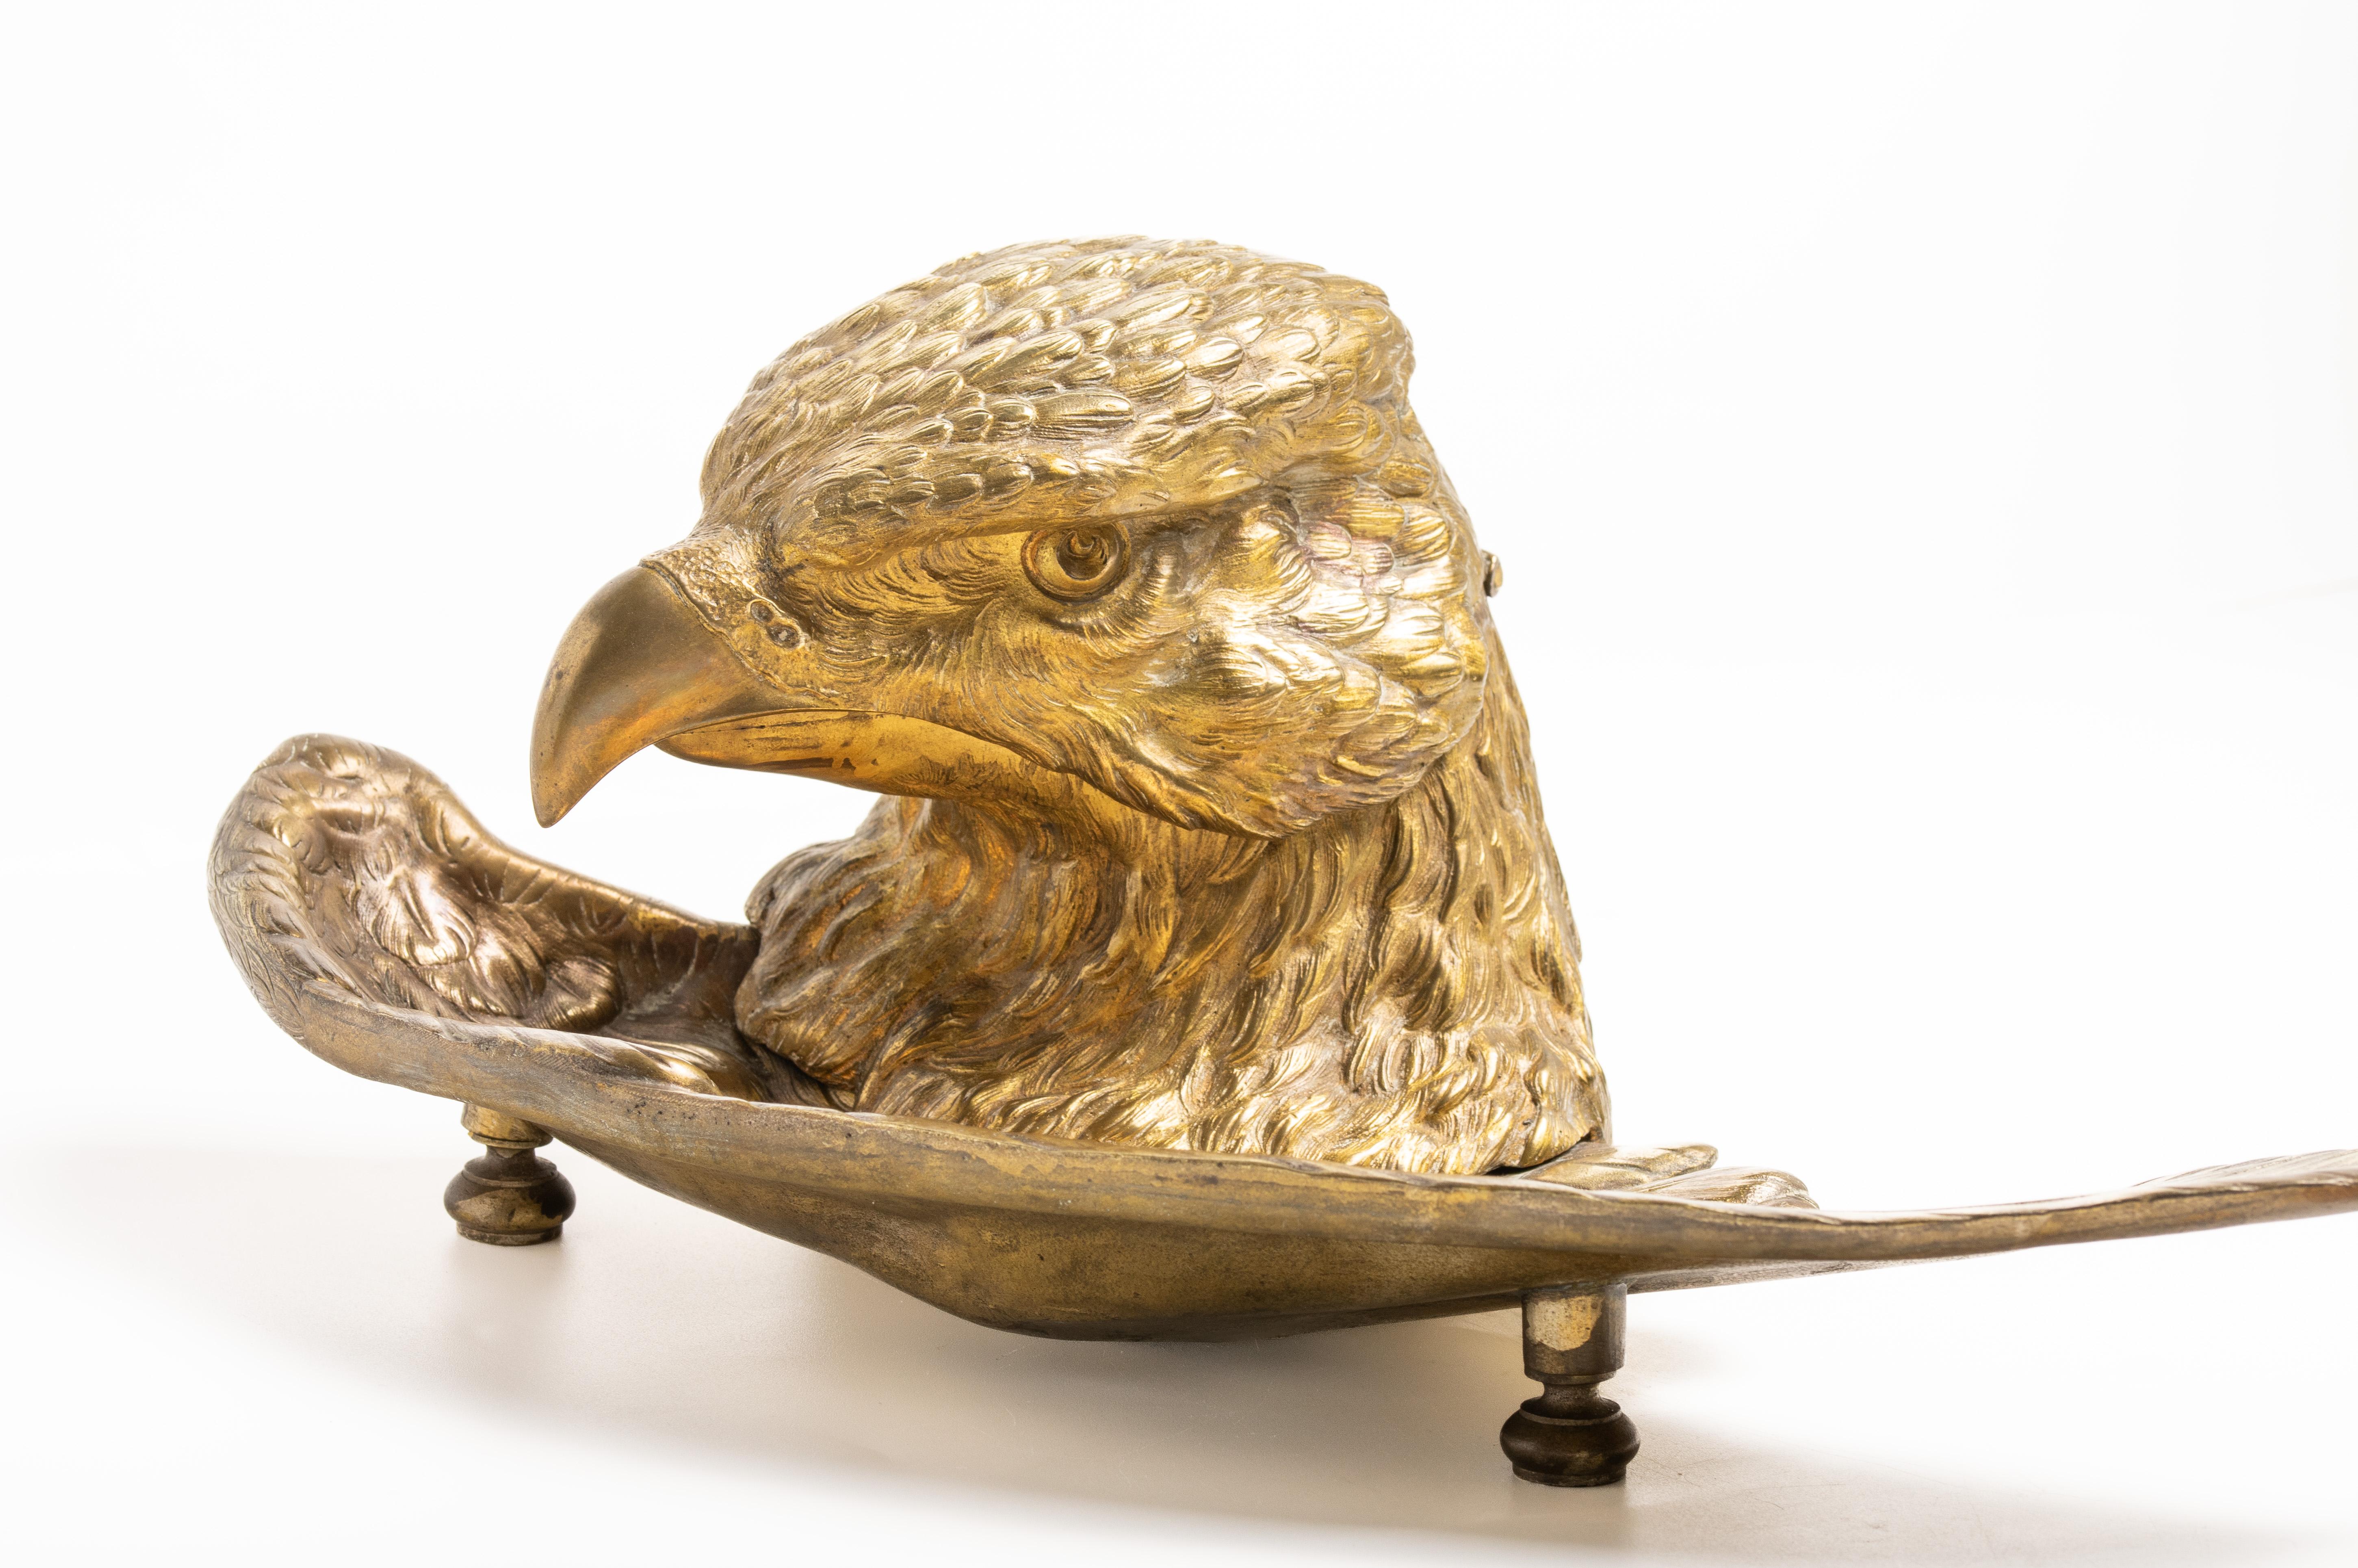 Antique French gilt metal novelty inkwell in a form of the eagle. This inkwell is made circa early 20th century and it was designed in the shape of an eagle’s head and a bird feather. An eagle's head opens nicely and fit a small glass ink bottle